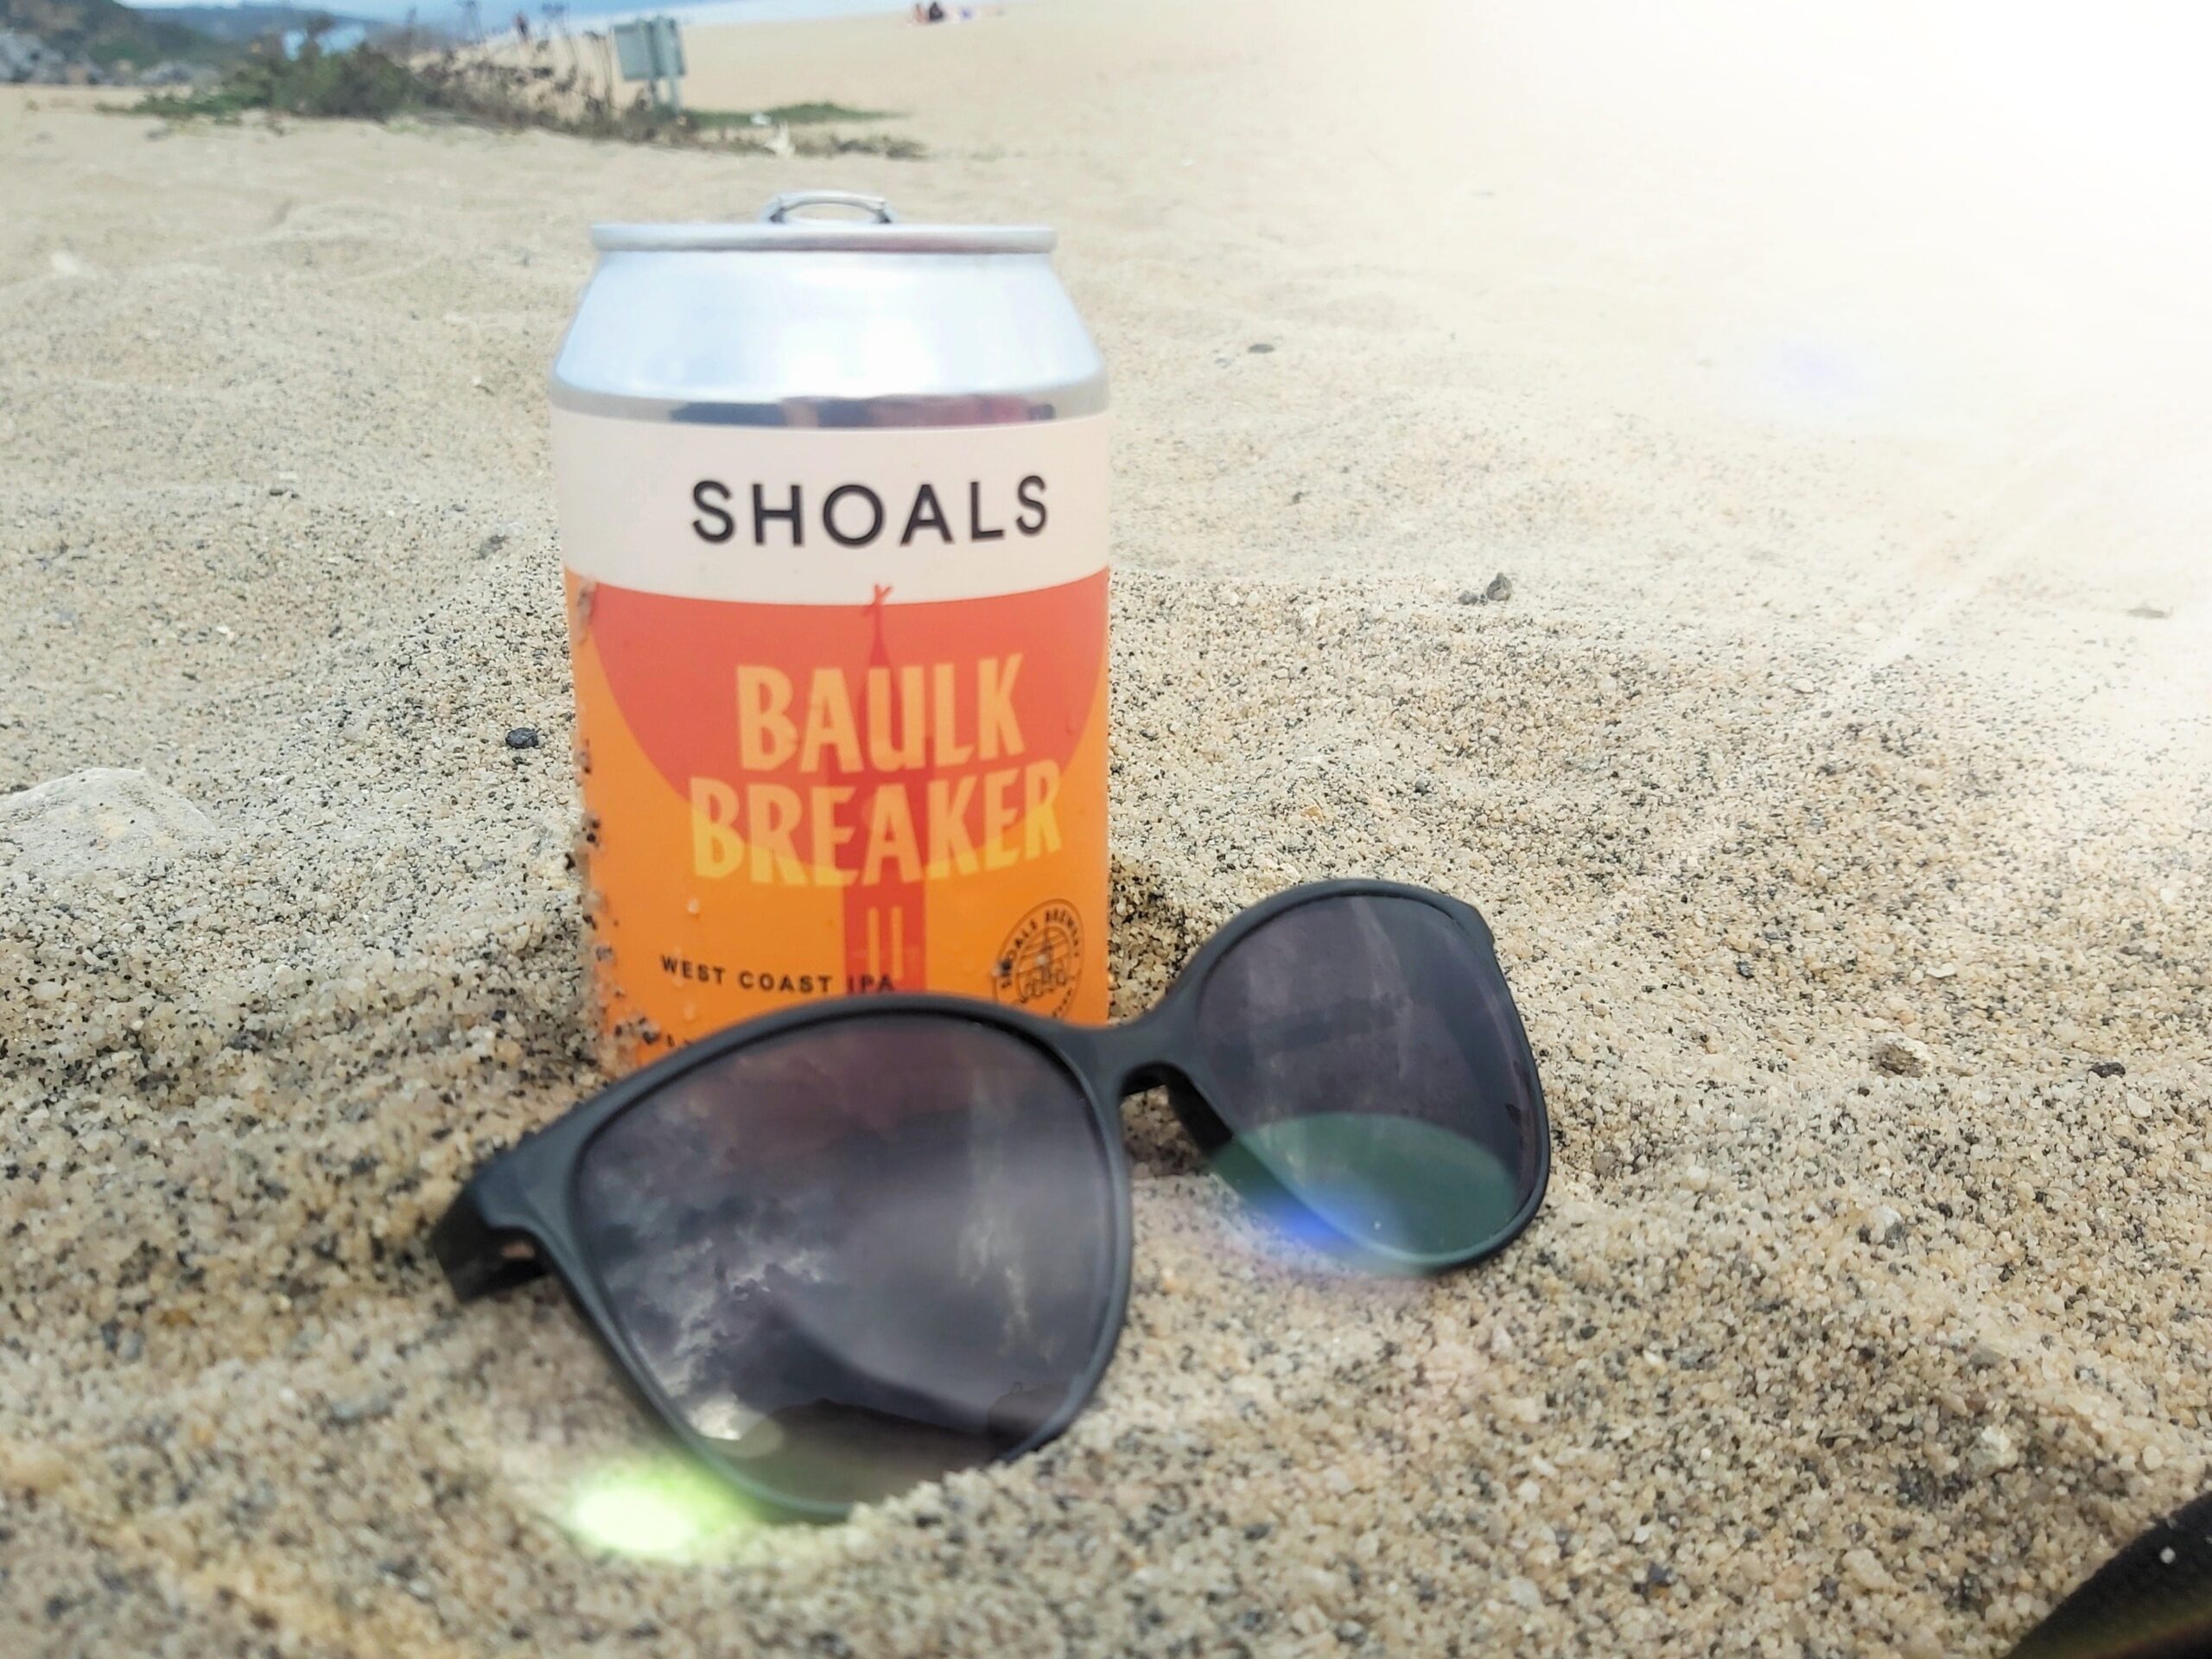 Can of Shoals IPA and sunglasses on the beach at Carlyon bay, Cornwall, England